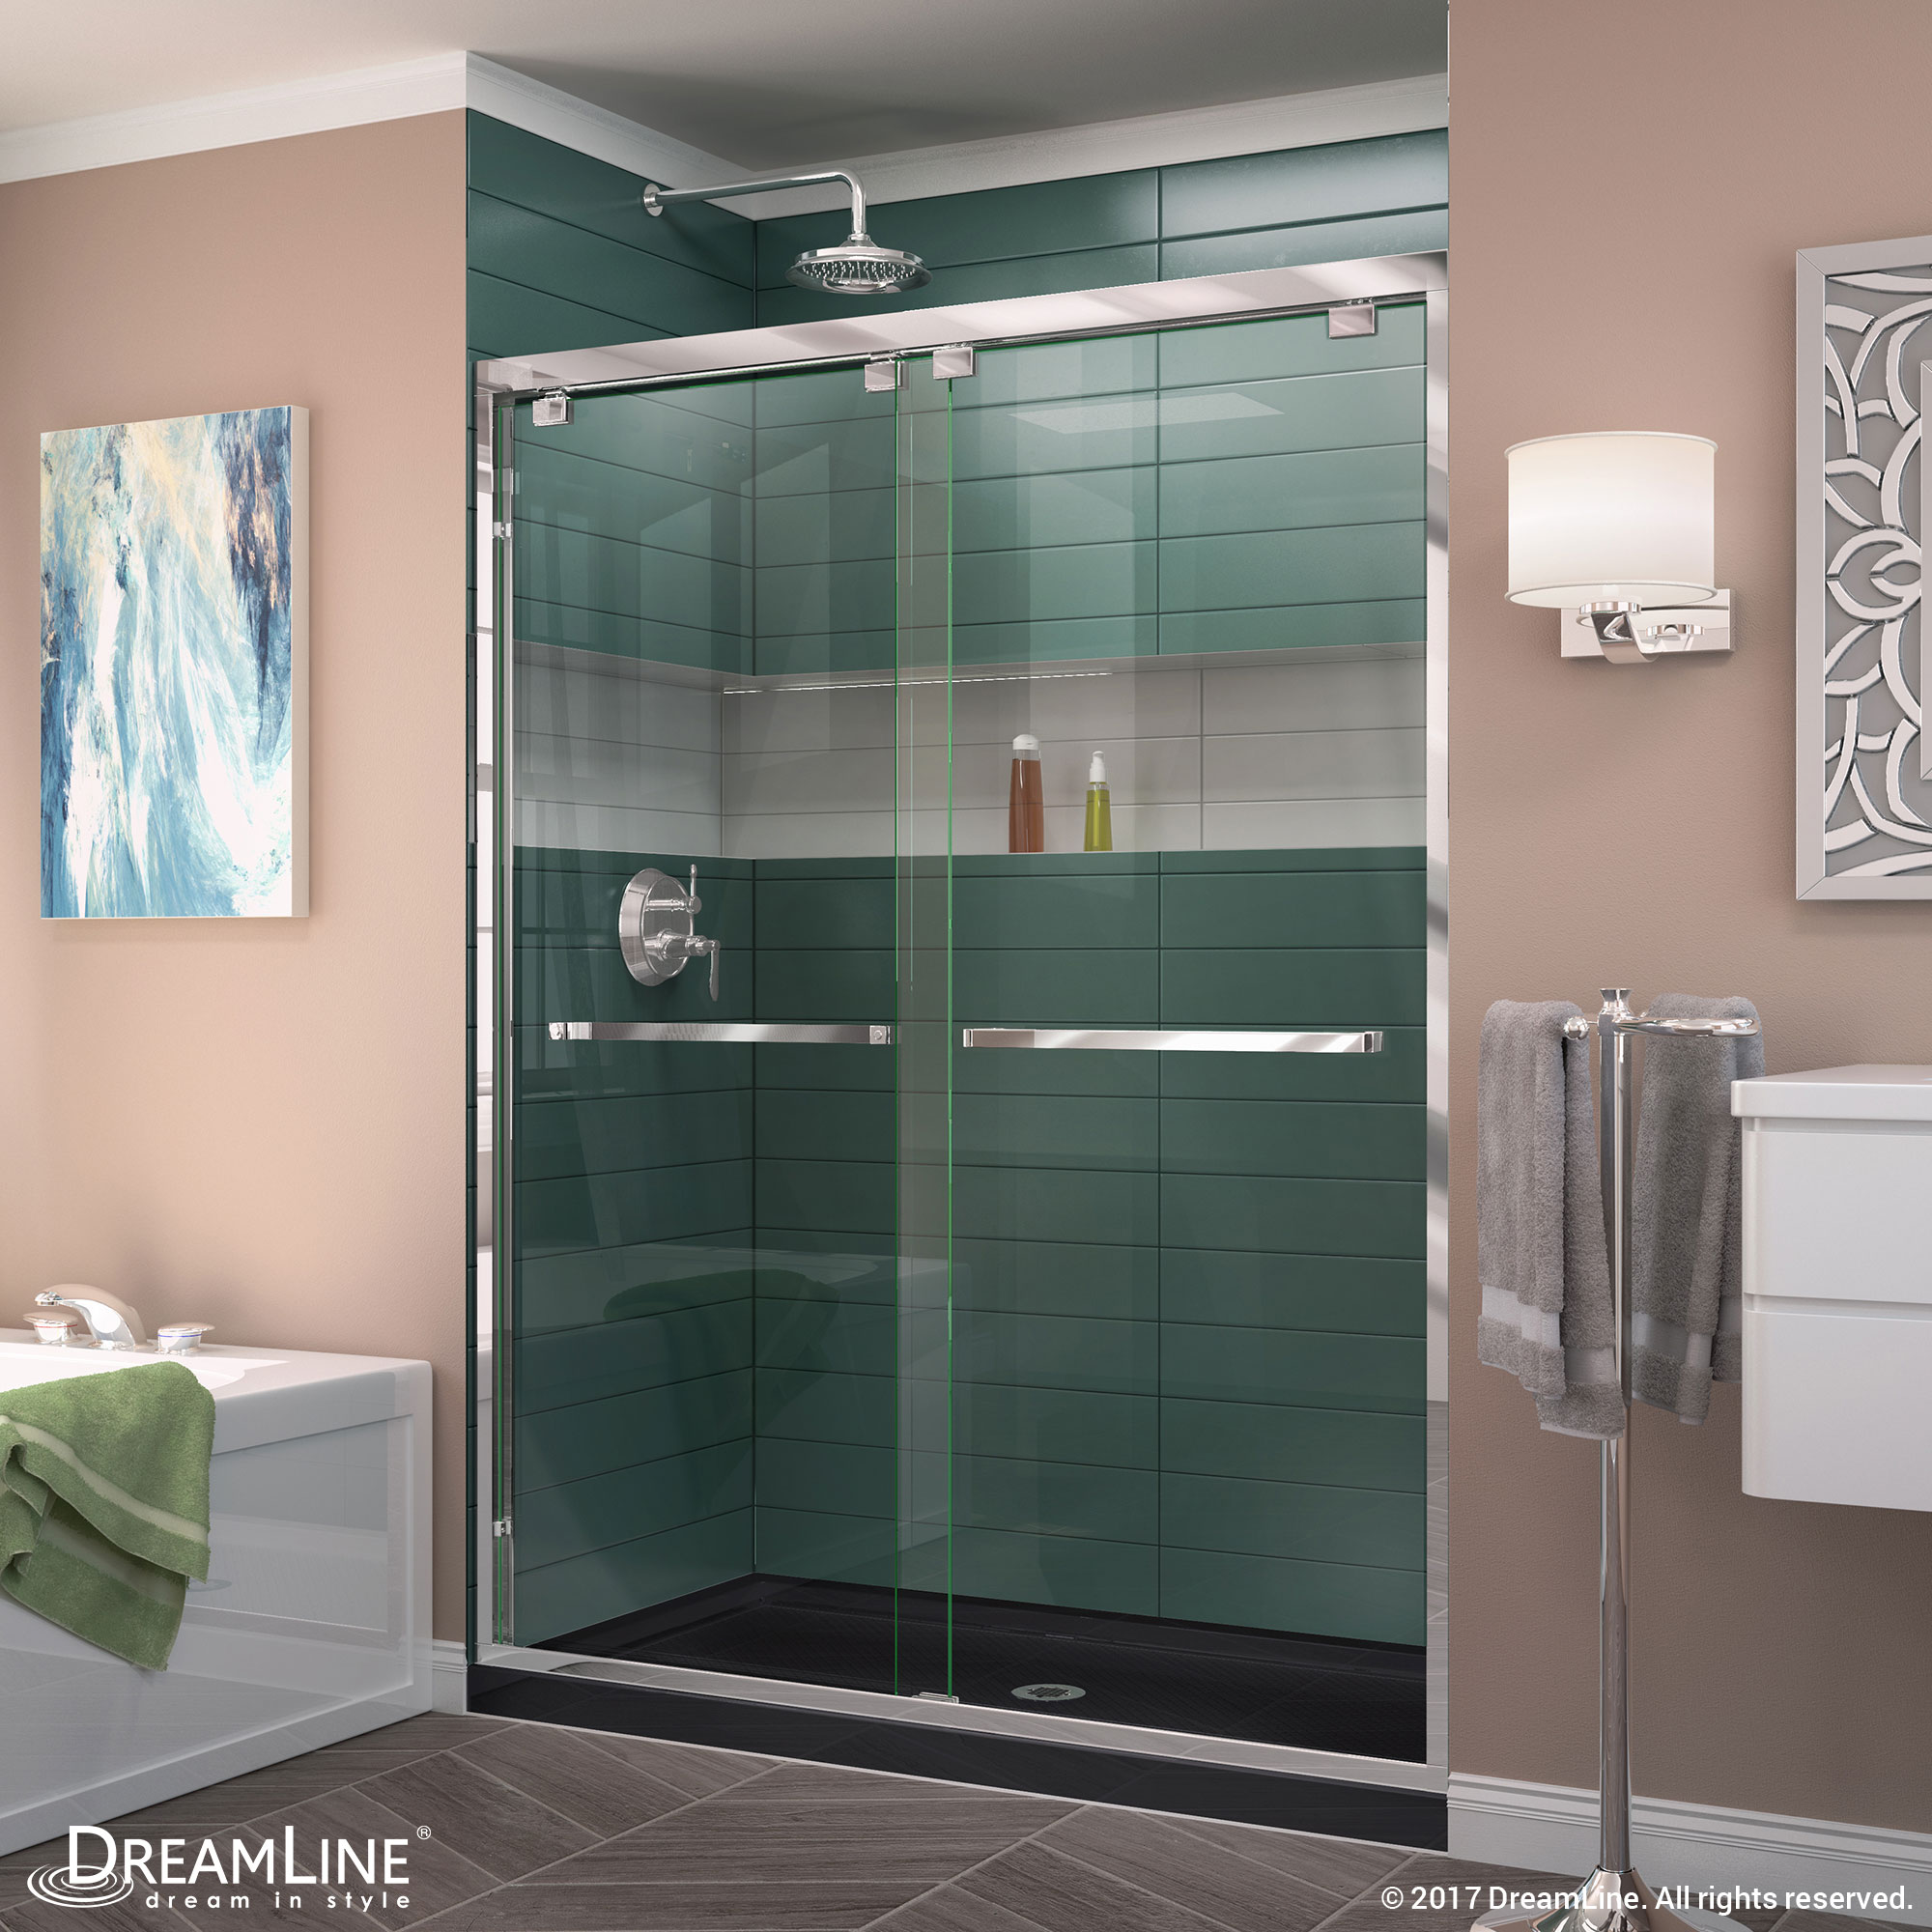 DreamLine Encore 30 in. D x 60 in. W x 78 3/4 in. H Bypass Shower Door in Oil Rubbed Bronze and Center Drain Biscuit Base Kit